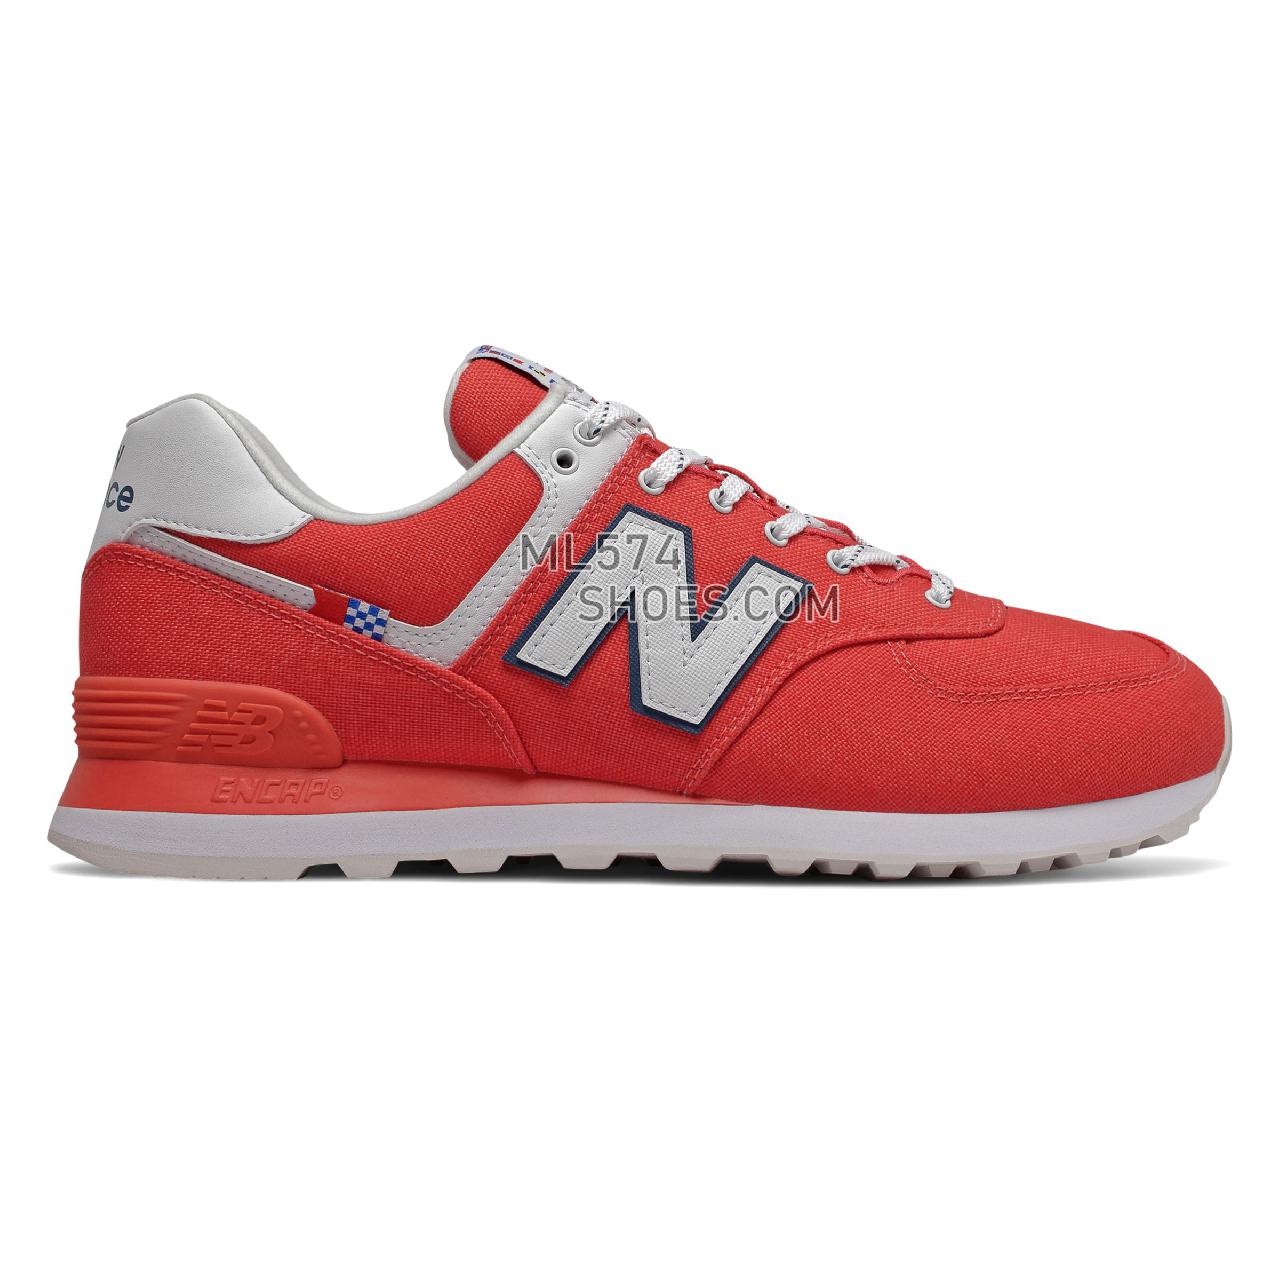 New Balance 574 - Men's Classic Sneakers - Toro Red with White - ML574SOL